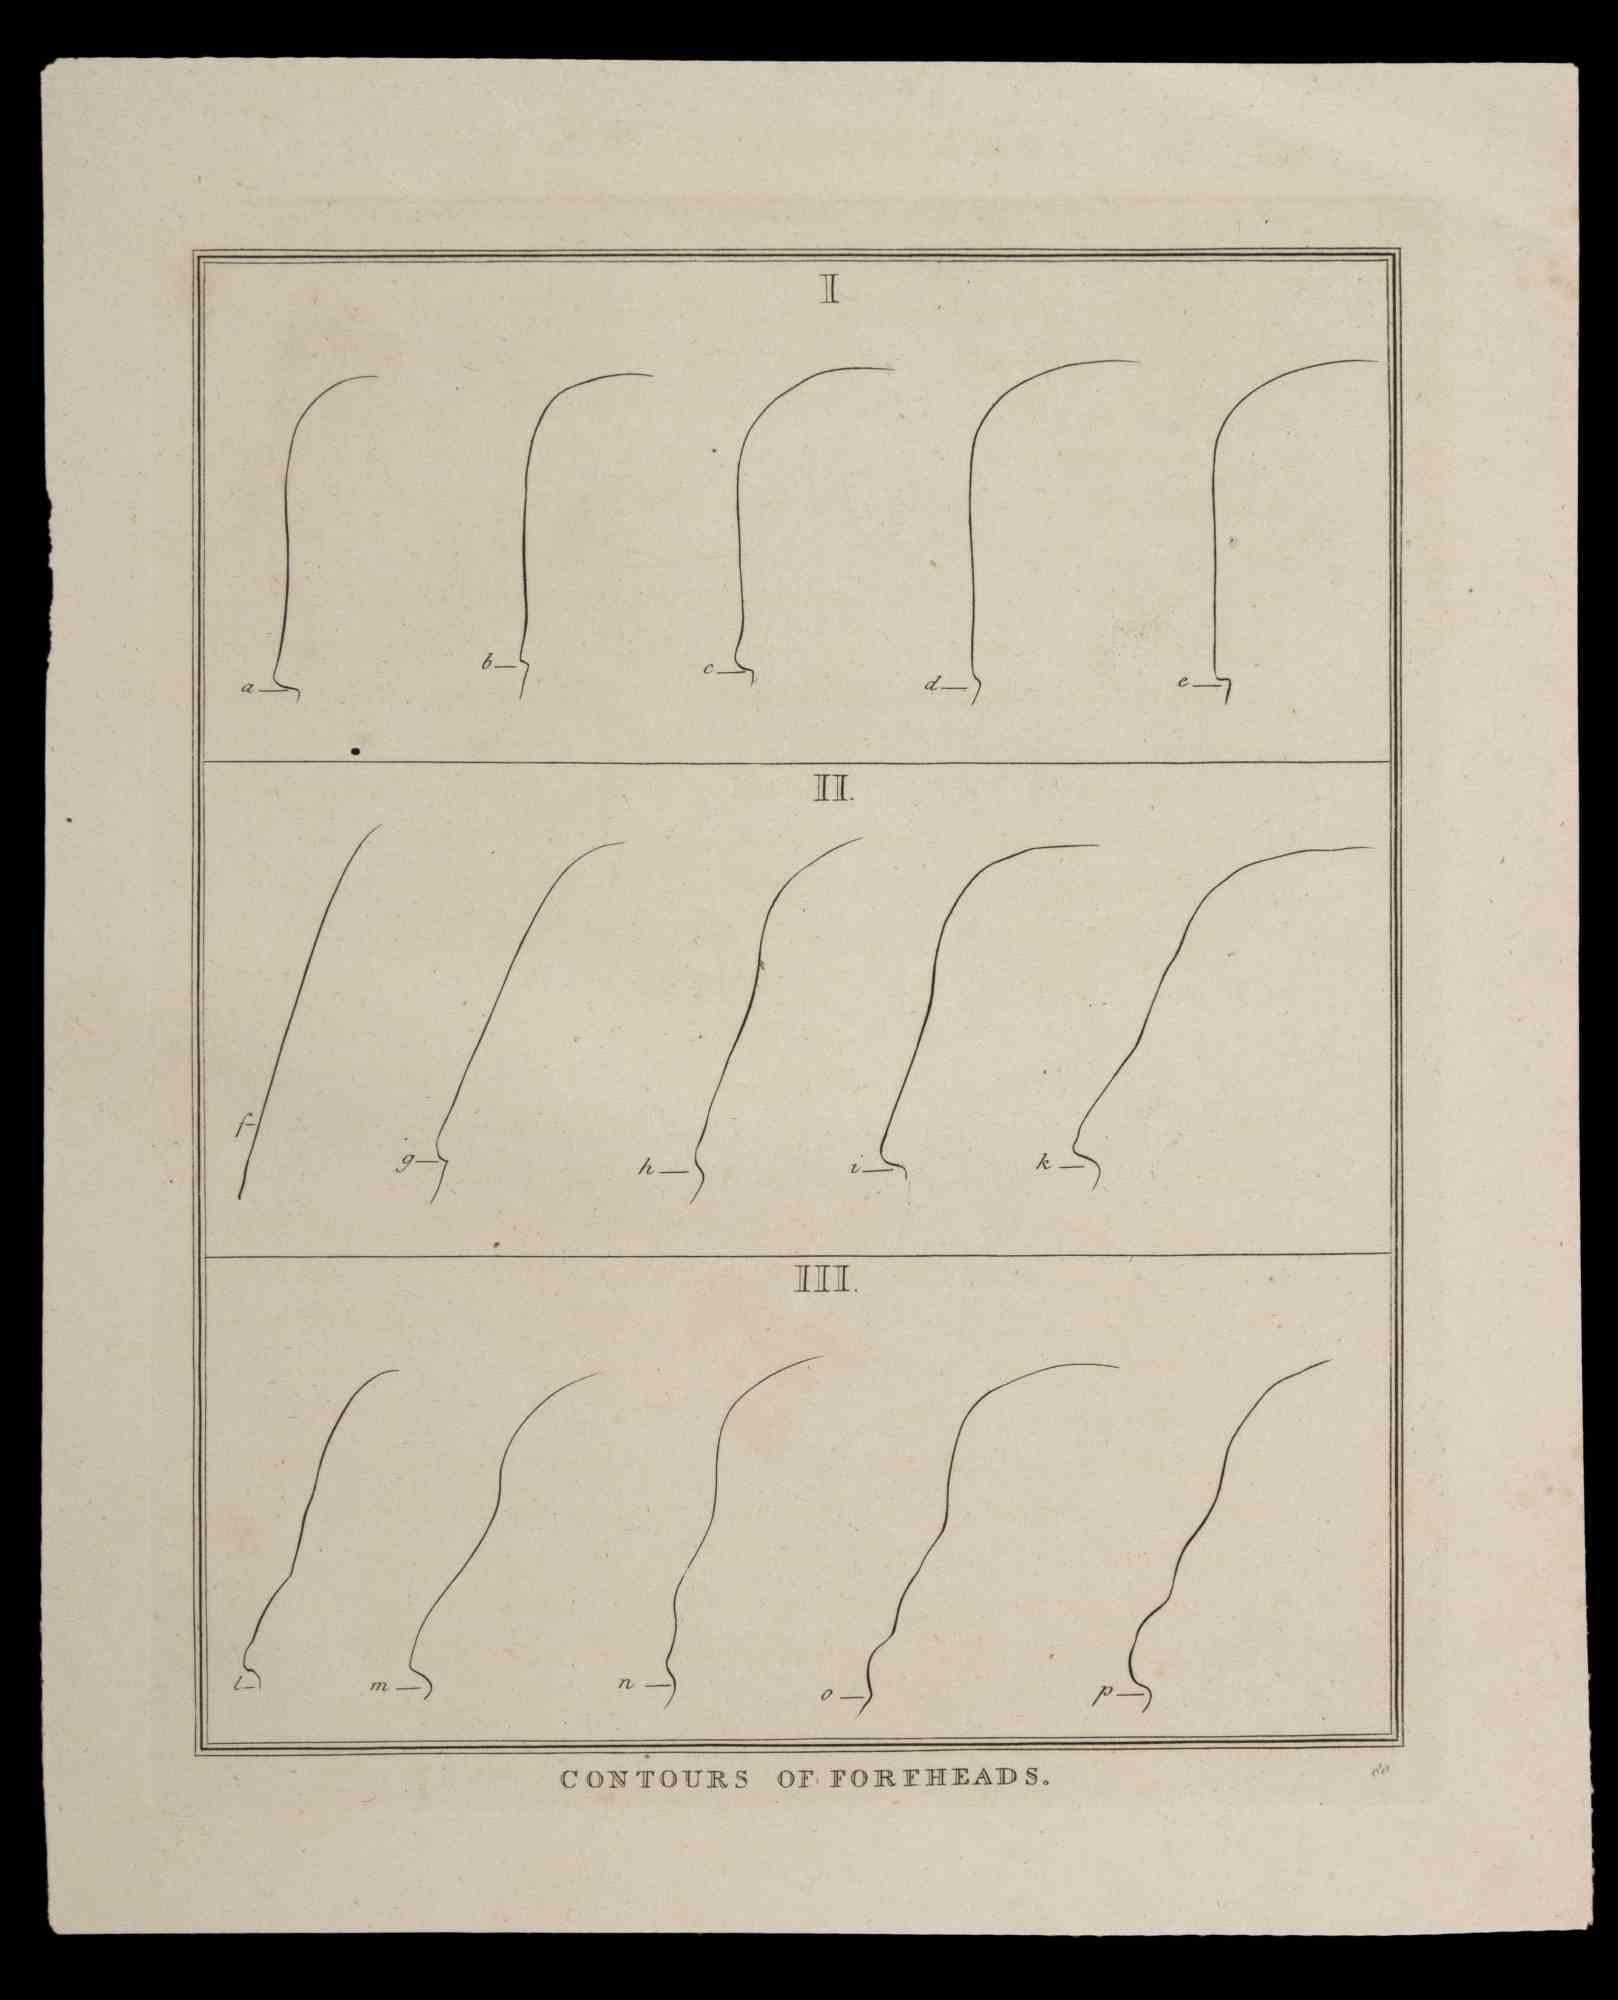 Contours of Foreheads is an original etching artwork realized by Thomas Holloway for Johann Caspar Lavater's "Essays on Physiognomy, Designed to Promote the Knowledge and the Love of Mankind", London, Bensley, 1810. 

Titled on the lower